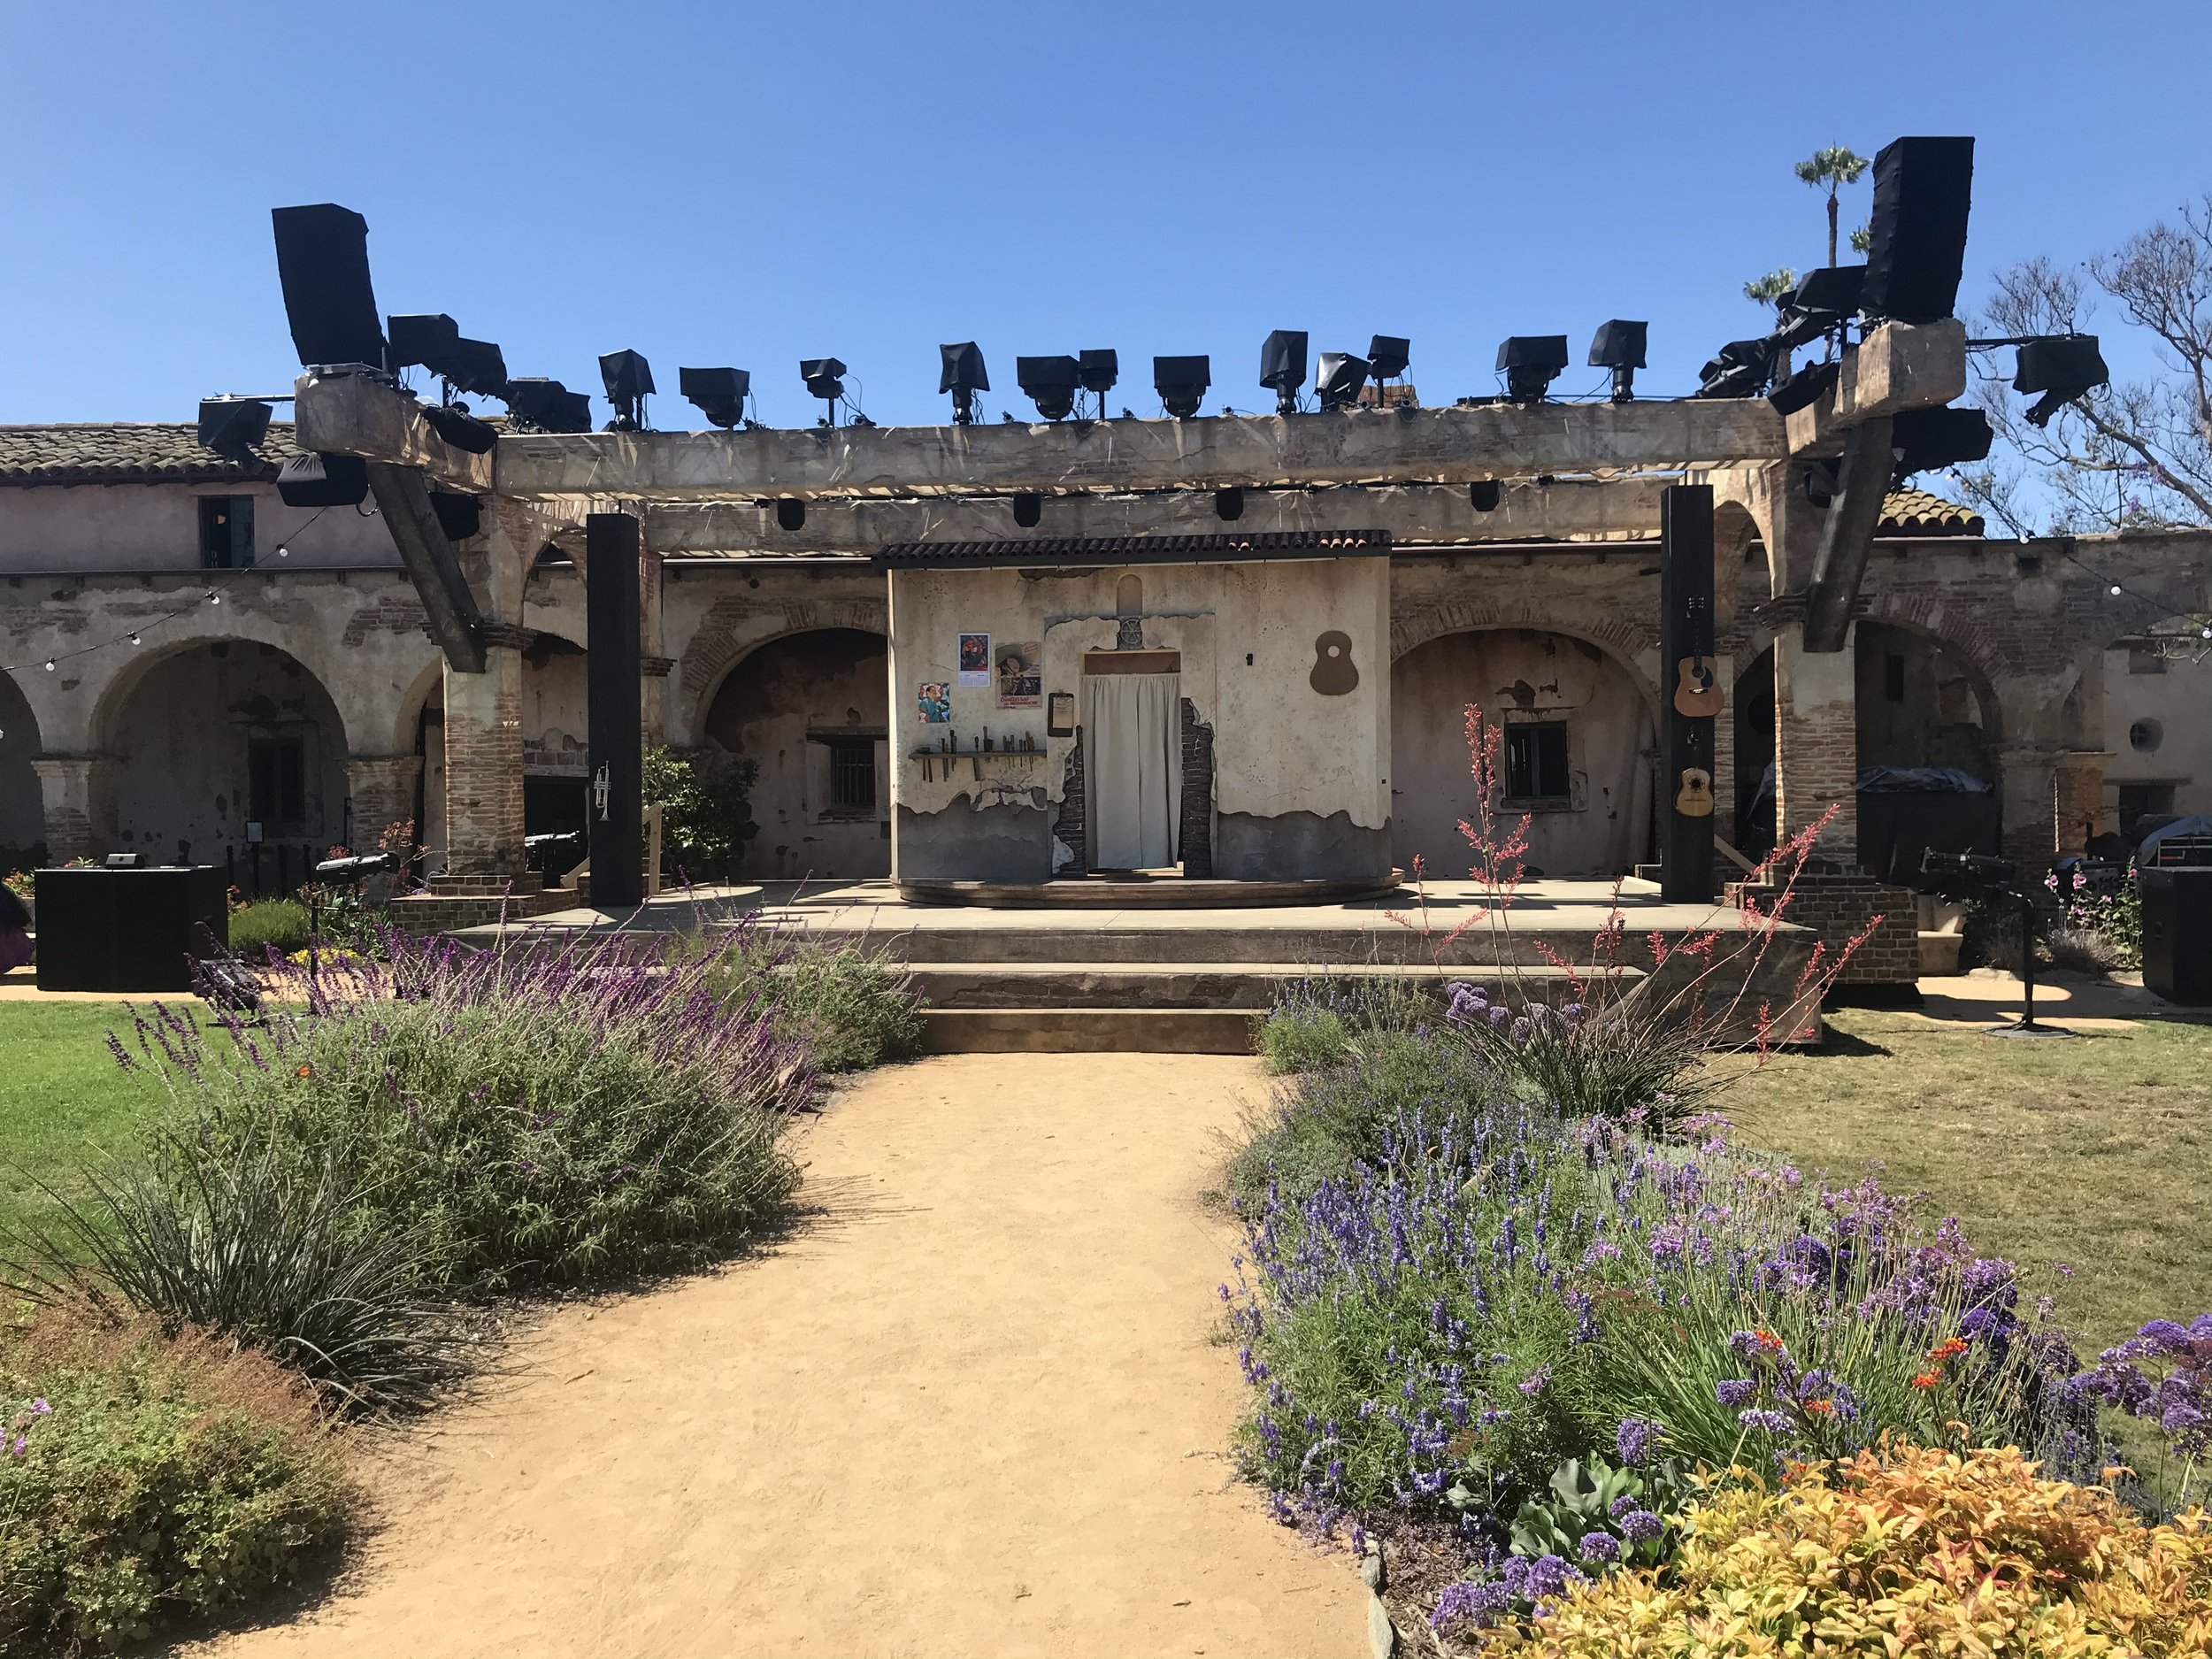  Outdoor stage at Mission San Juan Capistrano with American Mariachi set. 50-foot-long masking drop also pictured, installed behind the colonnade archways 